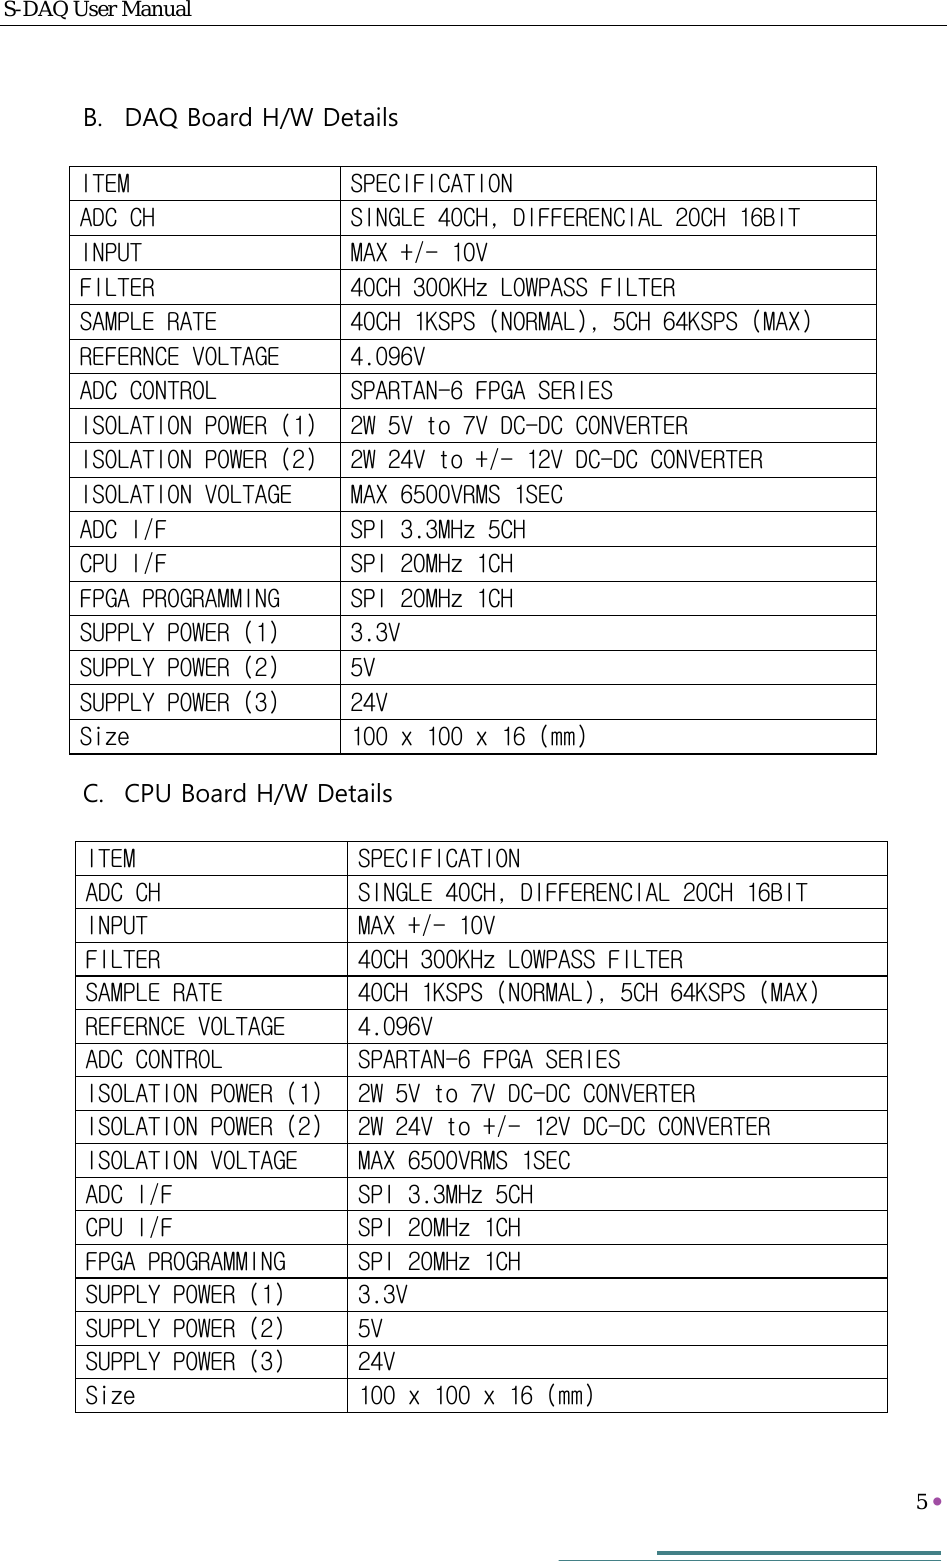 S-DAQ User Manual   5     B. DAQ Board H/W Details C. CPU Board H/W Details ITEM  SPECIFICATION ADC CH  SINGLE 40CH, DIFFERENCIAL 20CH 16BIT INPUT  MAX +/- 10V FILTER  40CH 300KHz LOWPASS FILTER SAMPLE RATE  40CH 1KSPS (NORMAL), 5CH 64KSPS (MAX) REFERNCE VOLTAGE  4.096V ADC CONTROL  SPARTAN-6 FPGA SERIES ISOLATION POWER (1)  2W 5V to 7V DC-DC CONVERTER  ISOLATION POWER (2)  2W 24V to +/- 12V DC-DC CONVERTER  ISOLATION VOLTAGE  MAX 6500VRMS 1SEC ADC I/F  SPI 3.3MHz 5CH CPU I/F  SPI 20MHz 1CH FPGA PROGRAMMING  SPI 20MHz 1CH SUPPLY POWER (1)  3.3V SUPPLY POWER (2)  5V SUPPLY POWER (3)  24V Size  100 x 100 x 16 (mm) ITEM  SPECIFICATION ADC CH  SINGLE 40CH, DIFFERENCIAL 20CH 16BIT INPUT  MAX +/- 10V FILTER  40CH 300KHz LOWPASS FILTER SAMPLE RATE  40CH 1KSPS (NORMAL), 5CH 64KSPS (MAX) REFERNCE VOLTAGE  4.096V ADC CONTROL  SPARTAN-6 FPGA SERIES ISOLATION POWER (1)  2W 5V to 7V DC-DC CONVERTER  ISOLATION POWER (2)  2W 24V to +/- 12V DC-DC CONVERTER  ISOLATION VOLTAGE  MAX 6500VRMS 1SEC ADC I/F  SPI 3.3MHz 5CH CPU I/F  SPI 20MHz 1CH FPGA PROGRAMMING  SPI 20MHz 1CH SUPPLY POWER (1)  3.3V SUPPLY POWER (2)  5V SUPPLY POWER (3)  24V Size  100 x 100 x 16 (mm) 